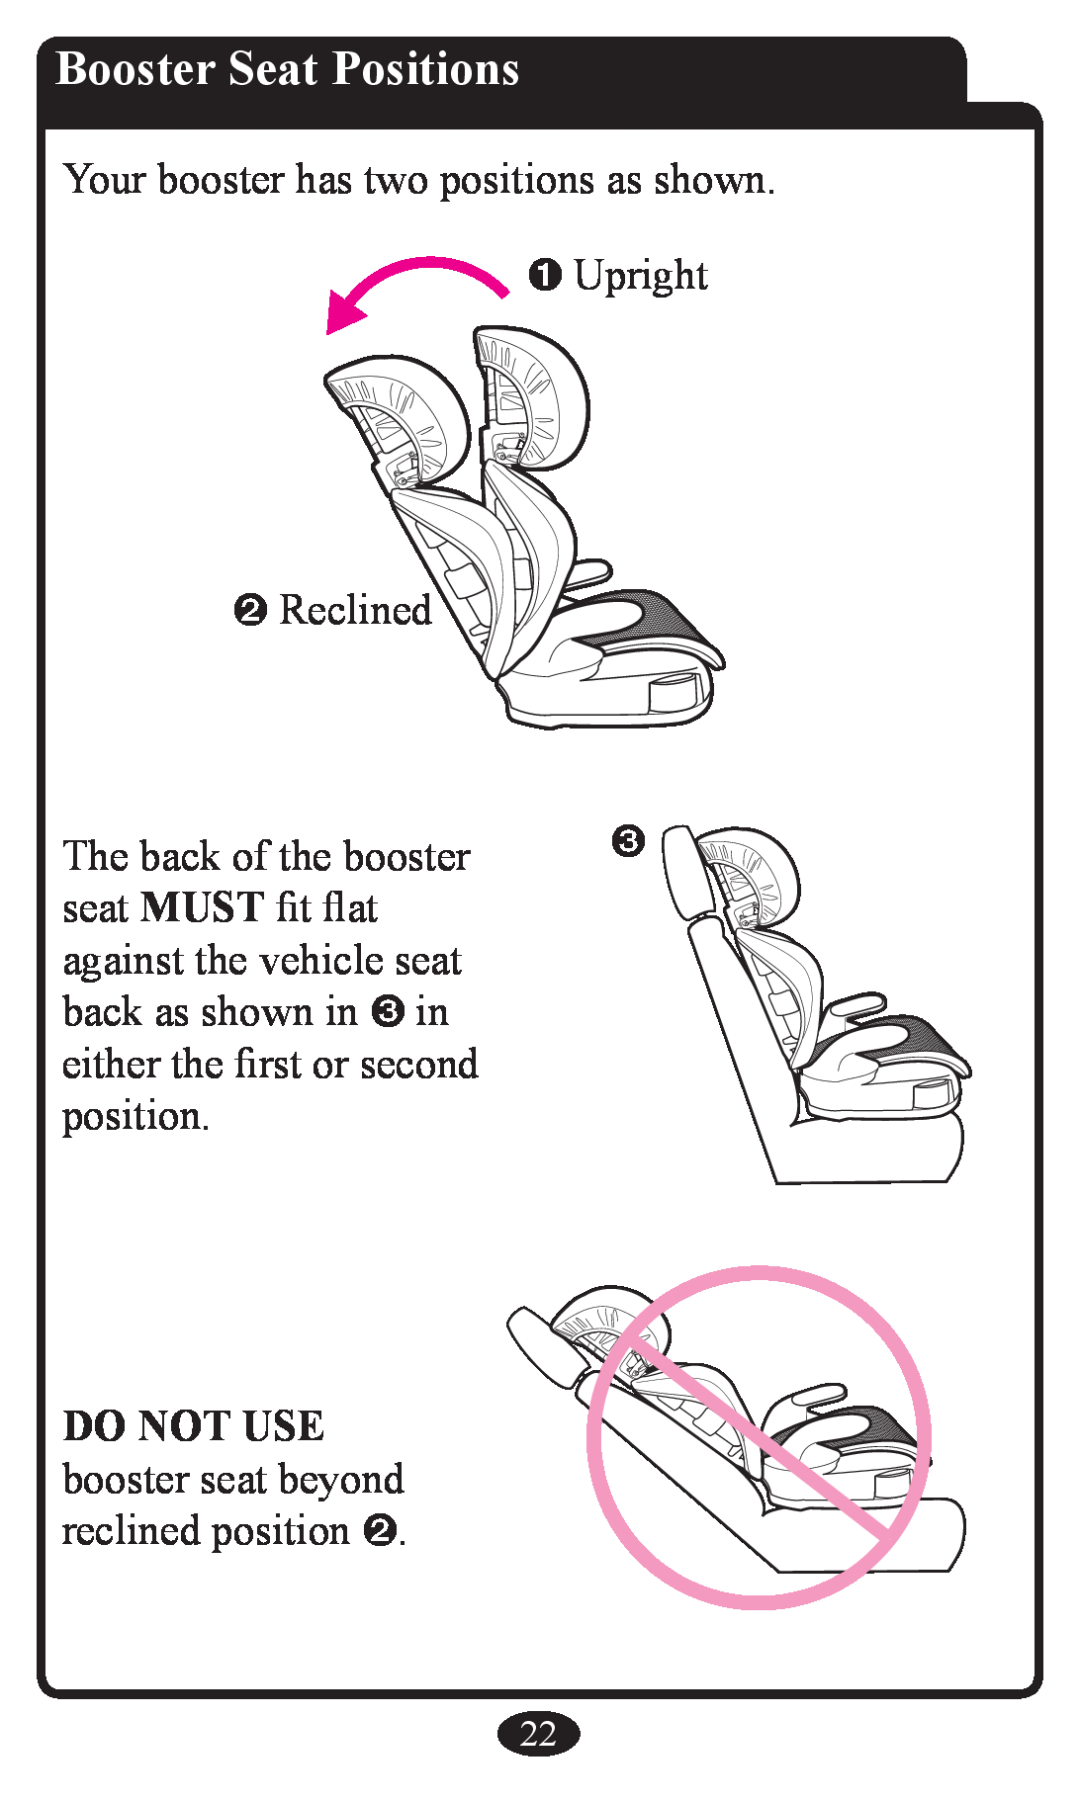 Graco Booster Seat Positions, Your booster has two positions as shown  Upright  Reclined, The back of the booster 